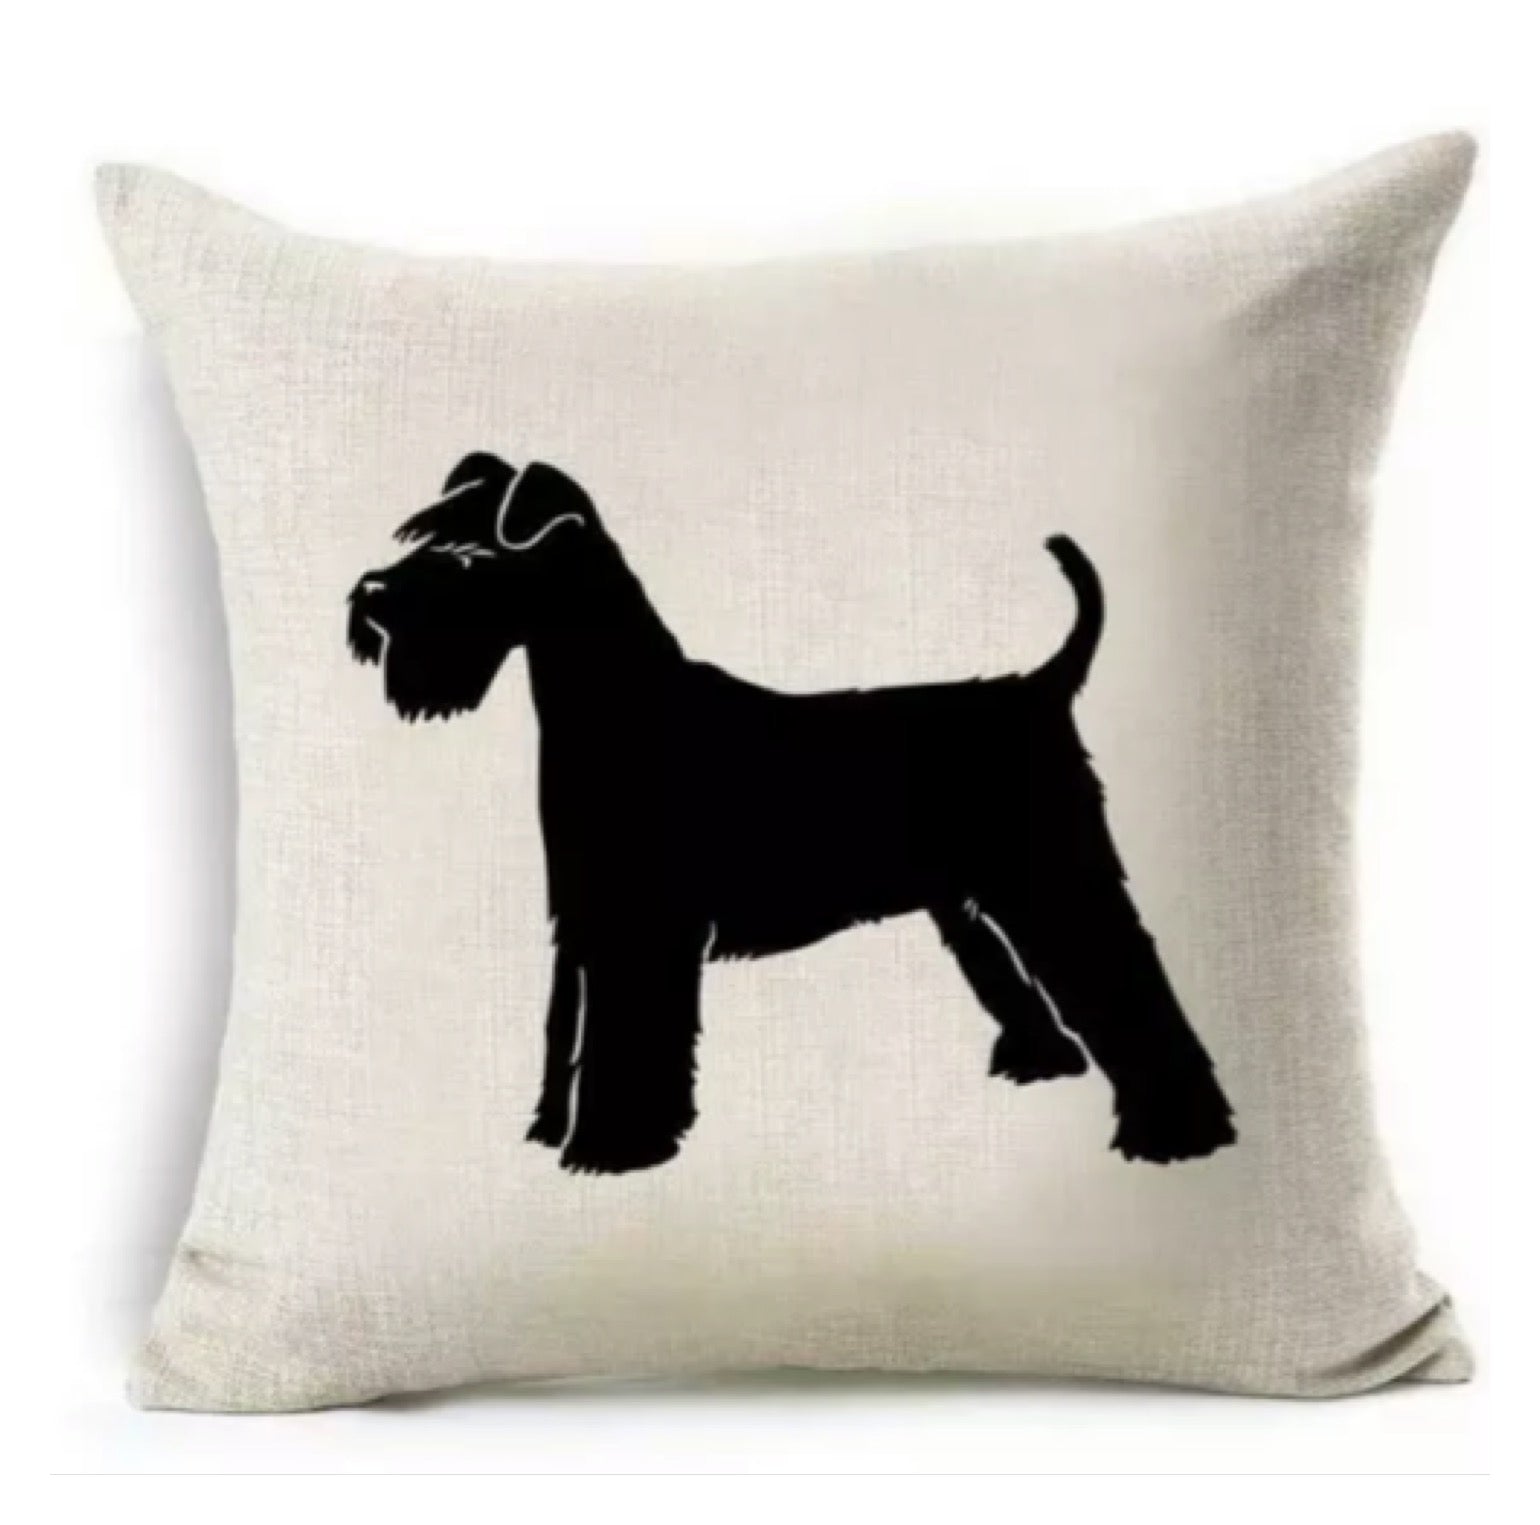 Cushion Cover Pillow Dog Schnauzer - The Renmy Store Homewares & Gifts 